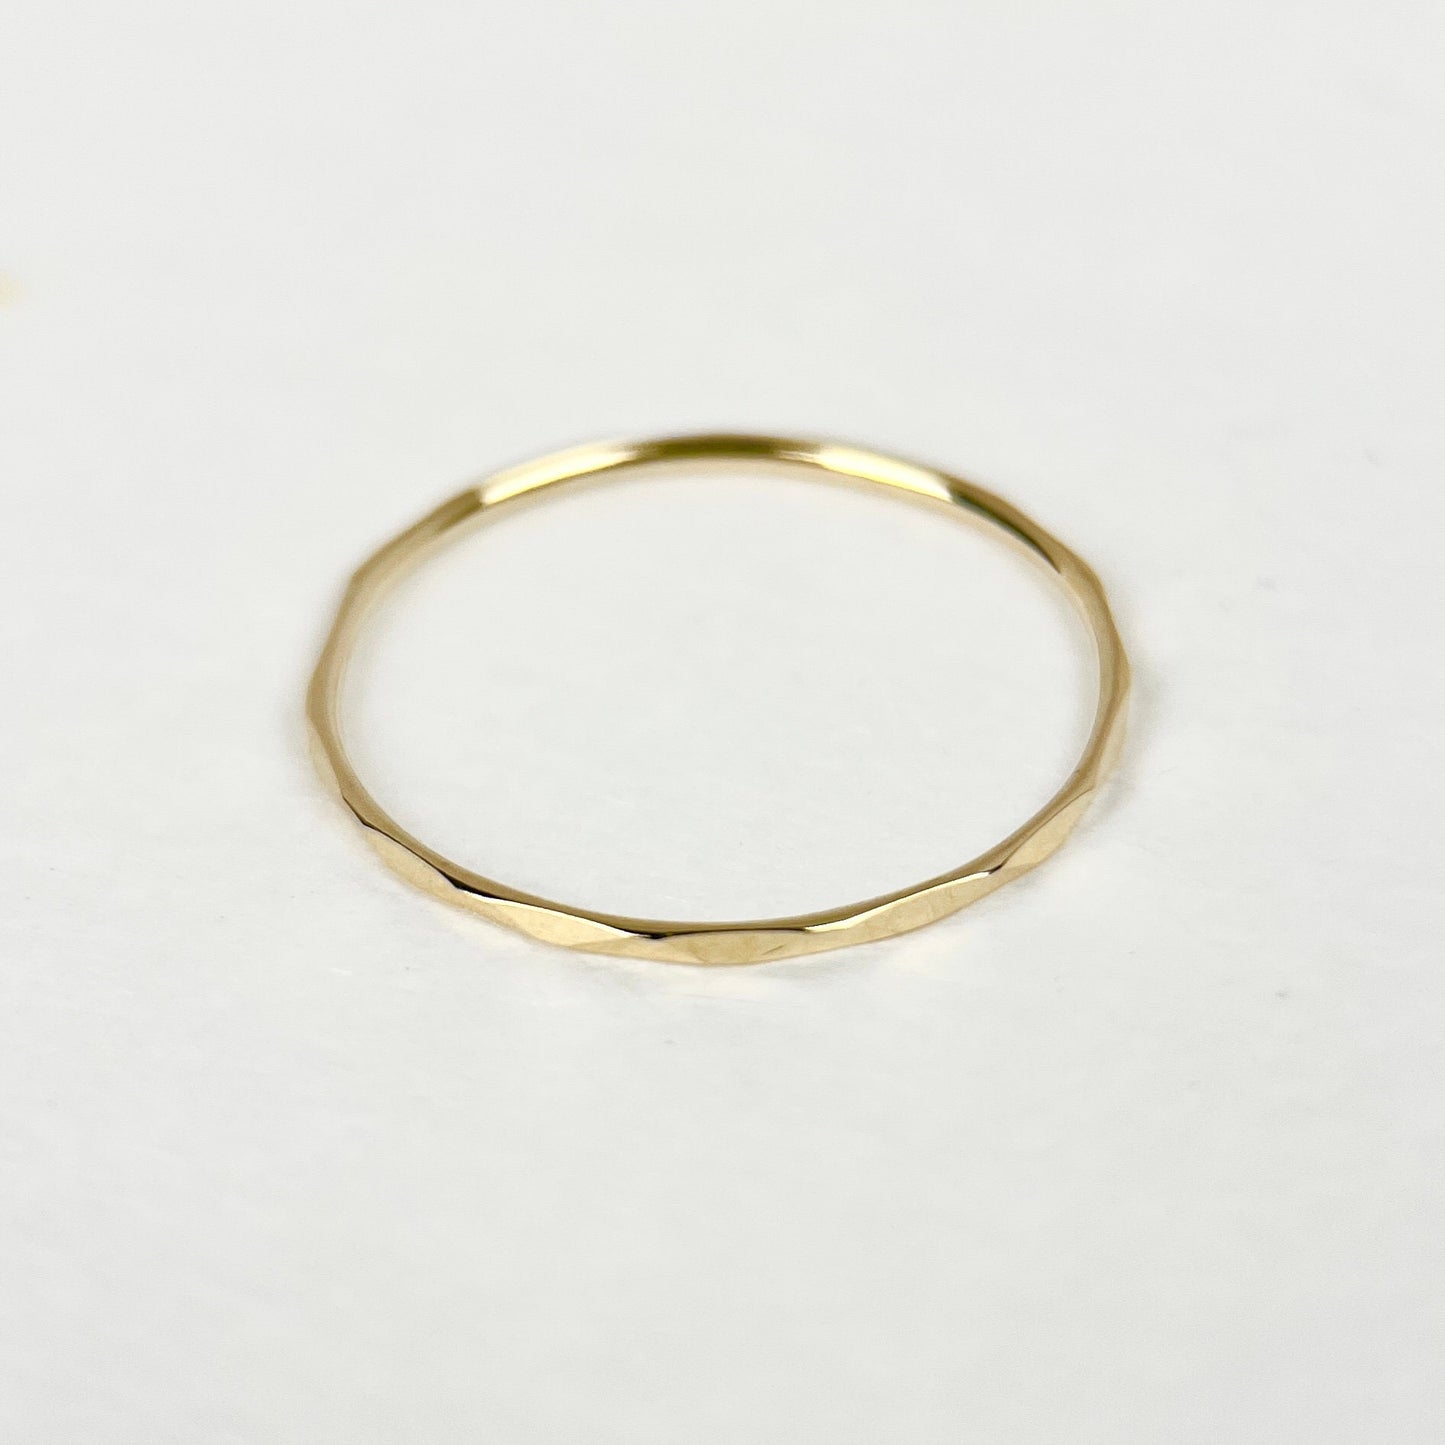 14K Solid Gold Stackable Dainty Thin Band Ring